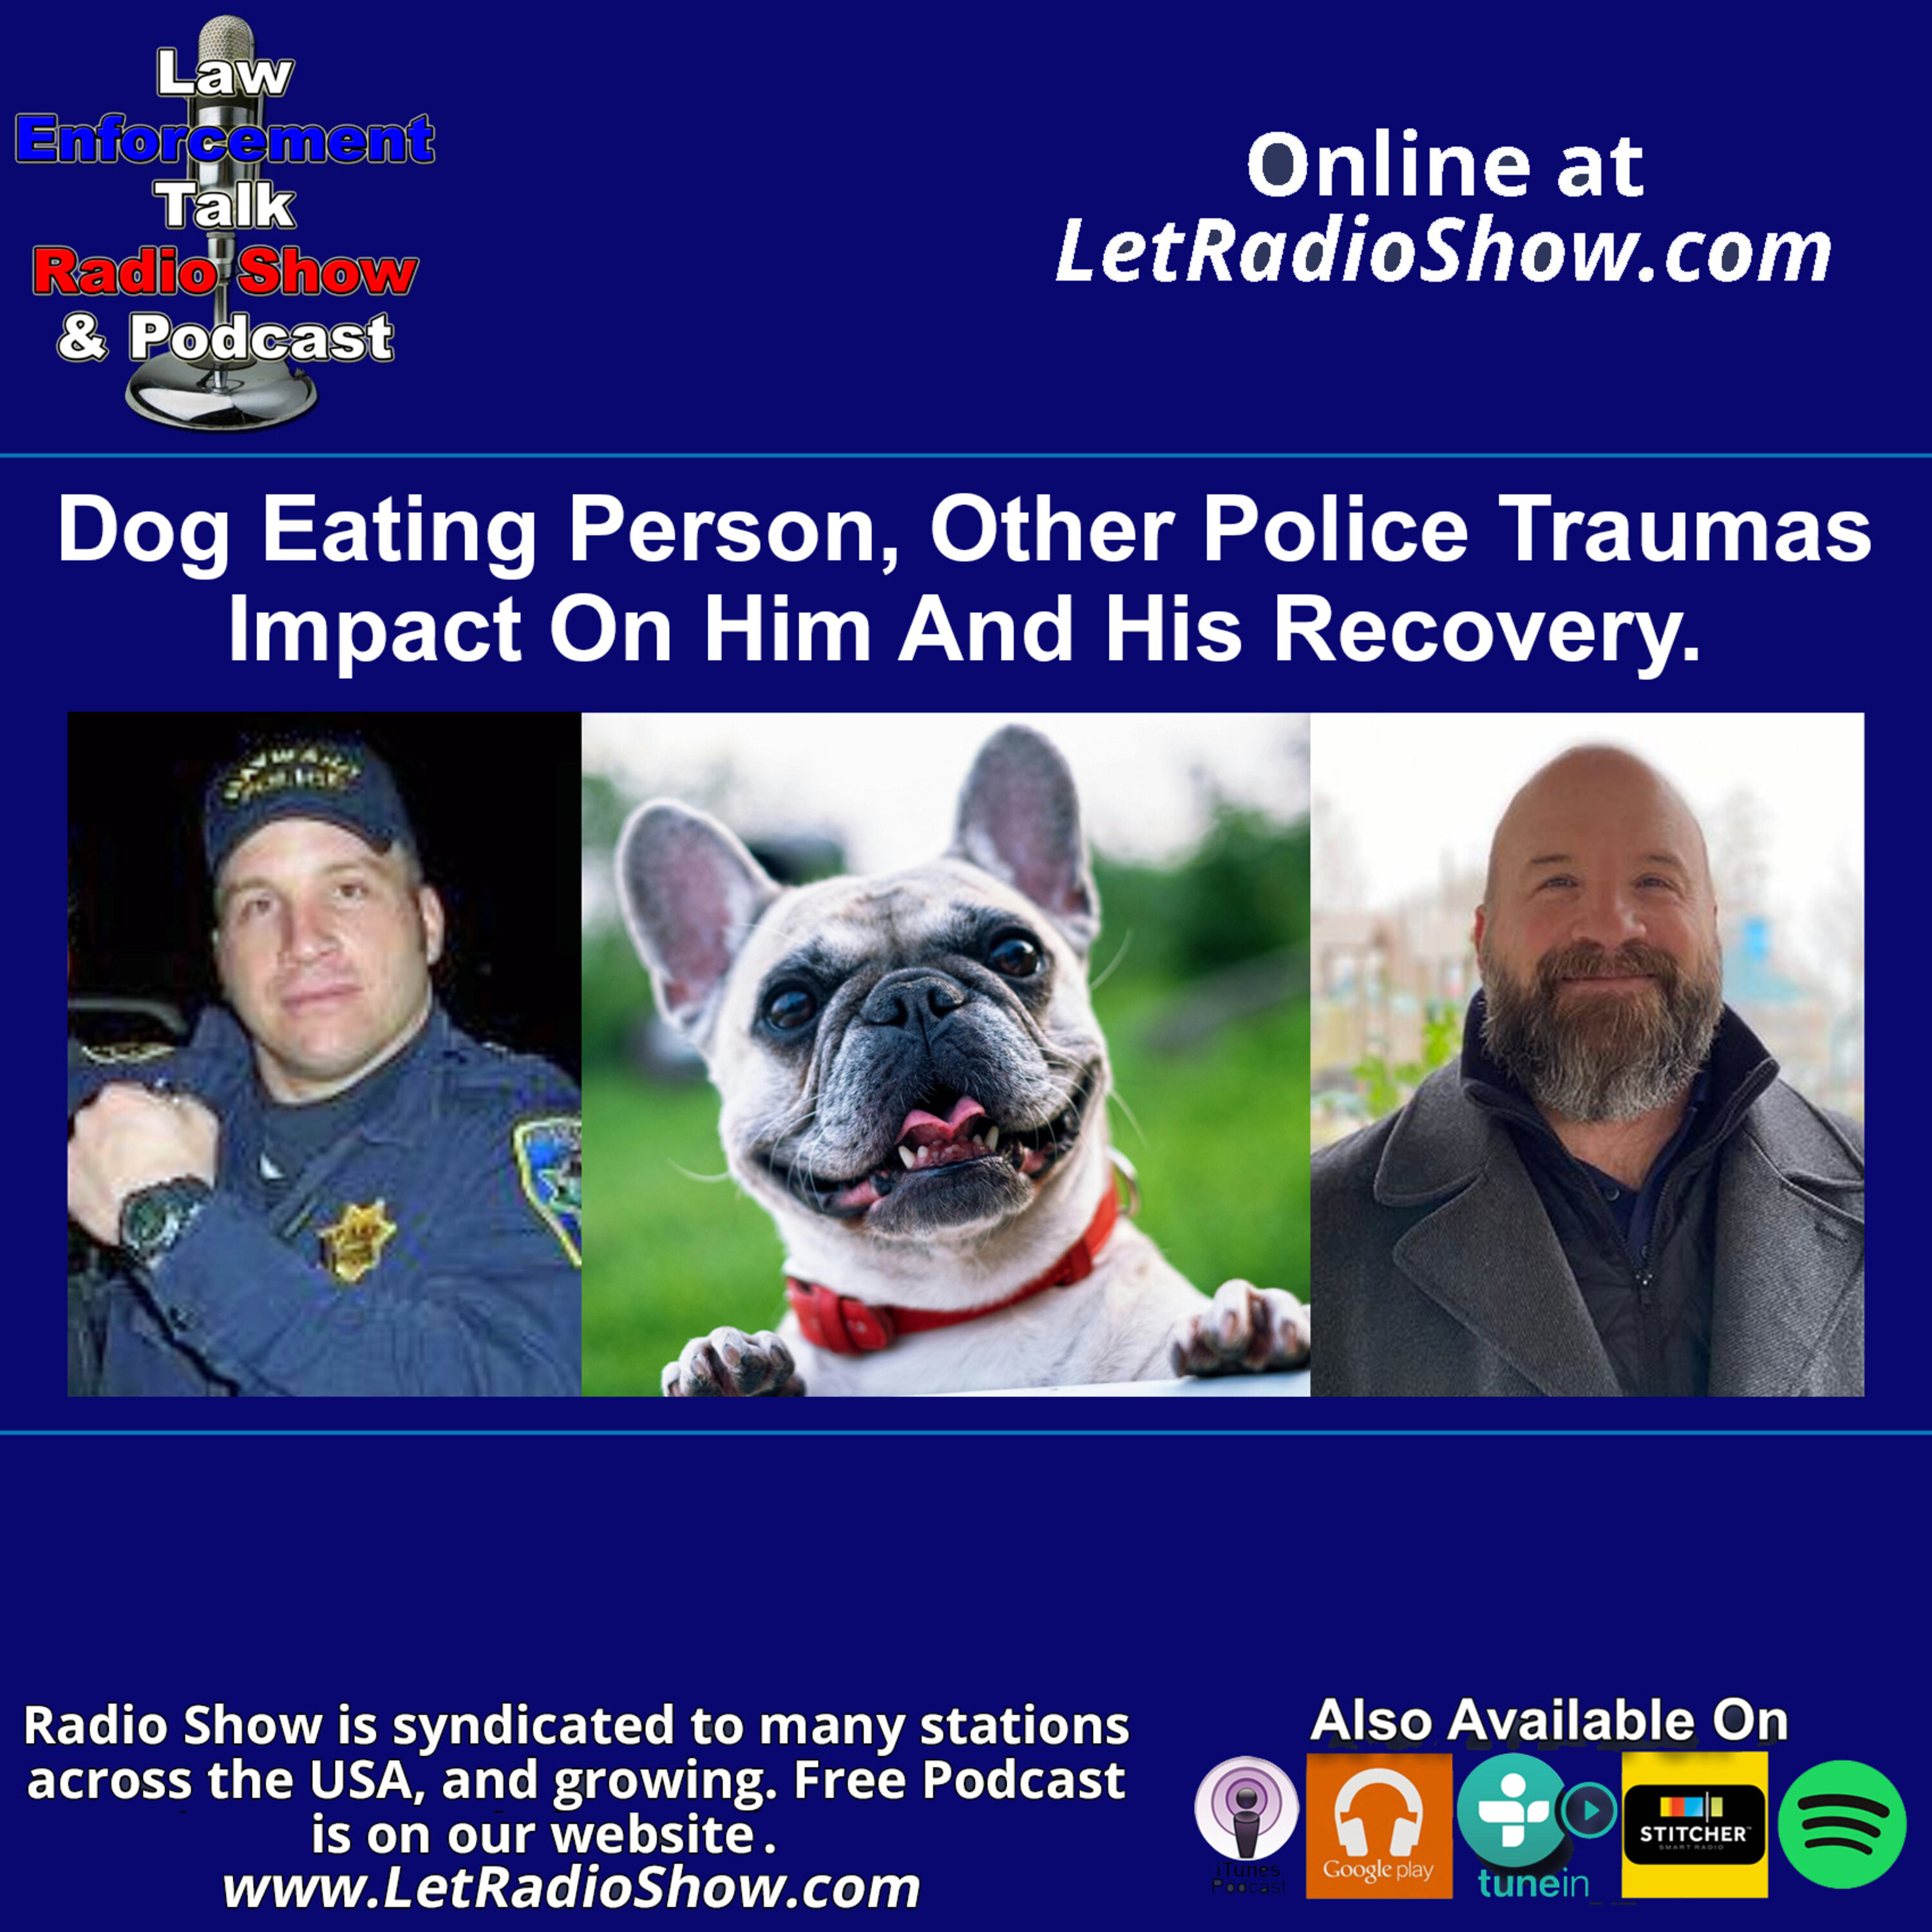 Dog Eating Person, Other Police Traumas Impact on Him, and His Recovery